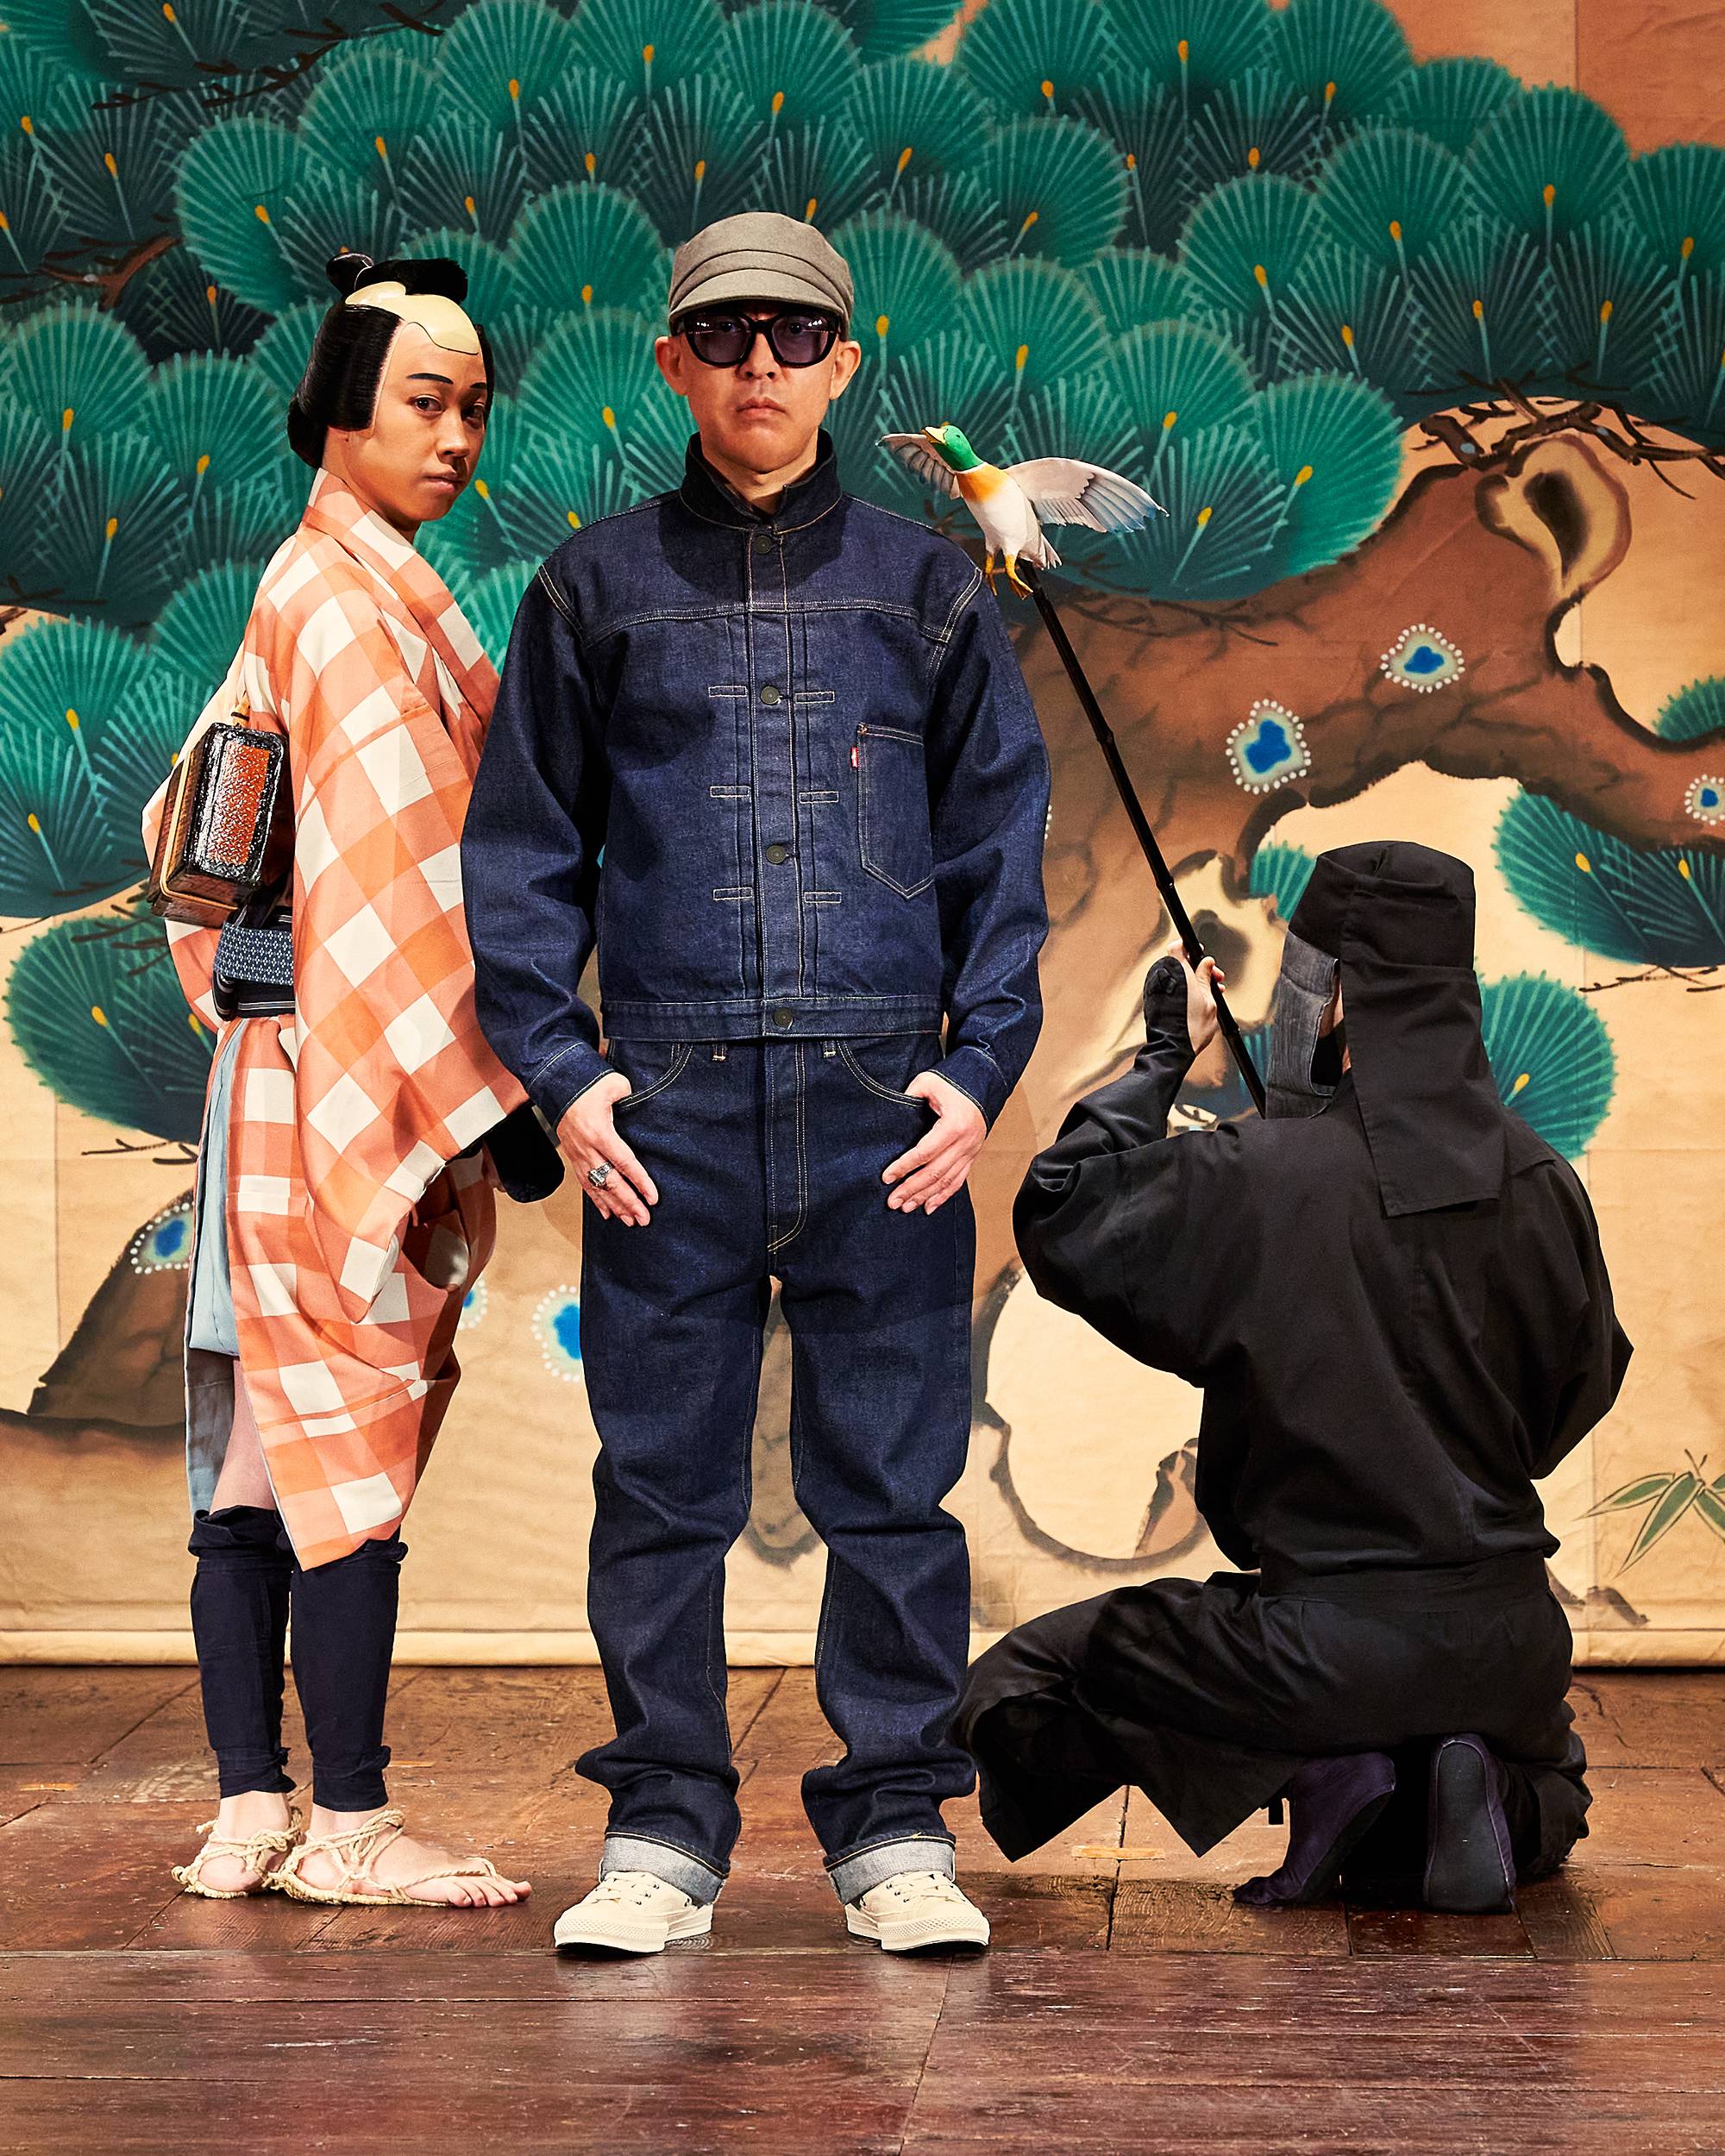 Levi's® x HUMAN MADE by NIGO release their 2nd collaboration feat